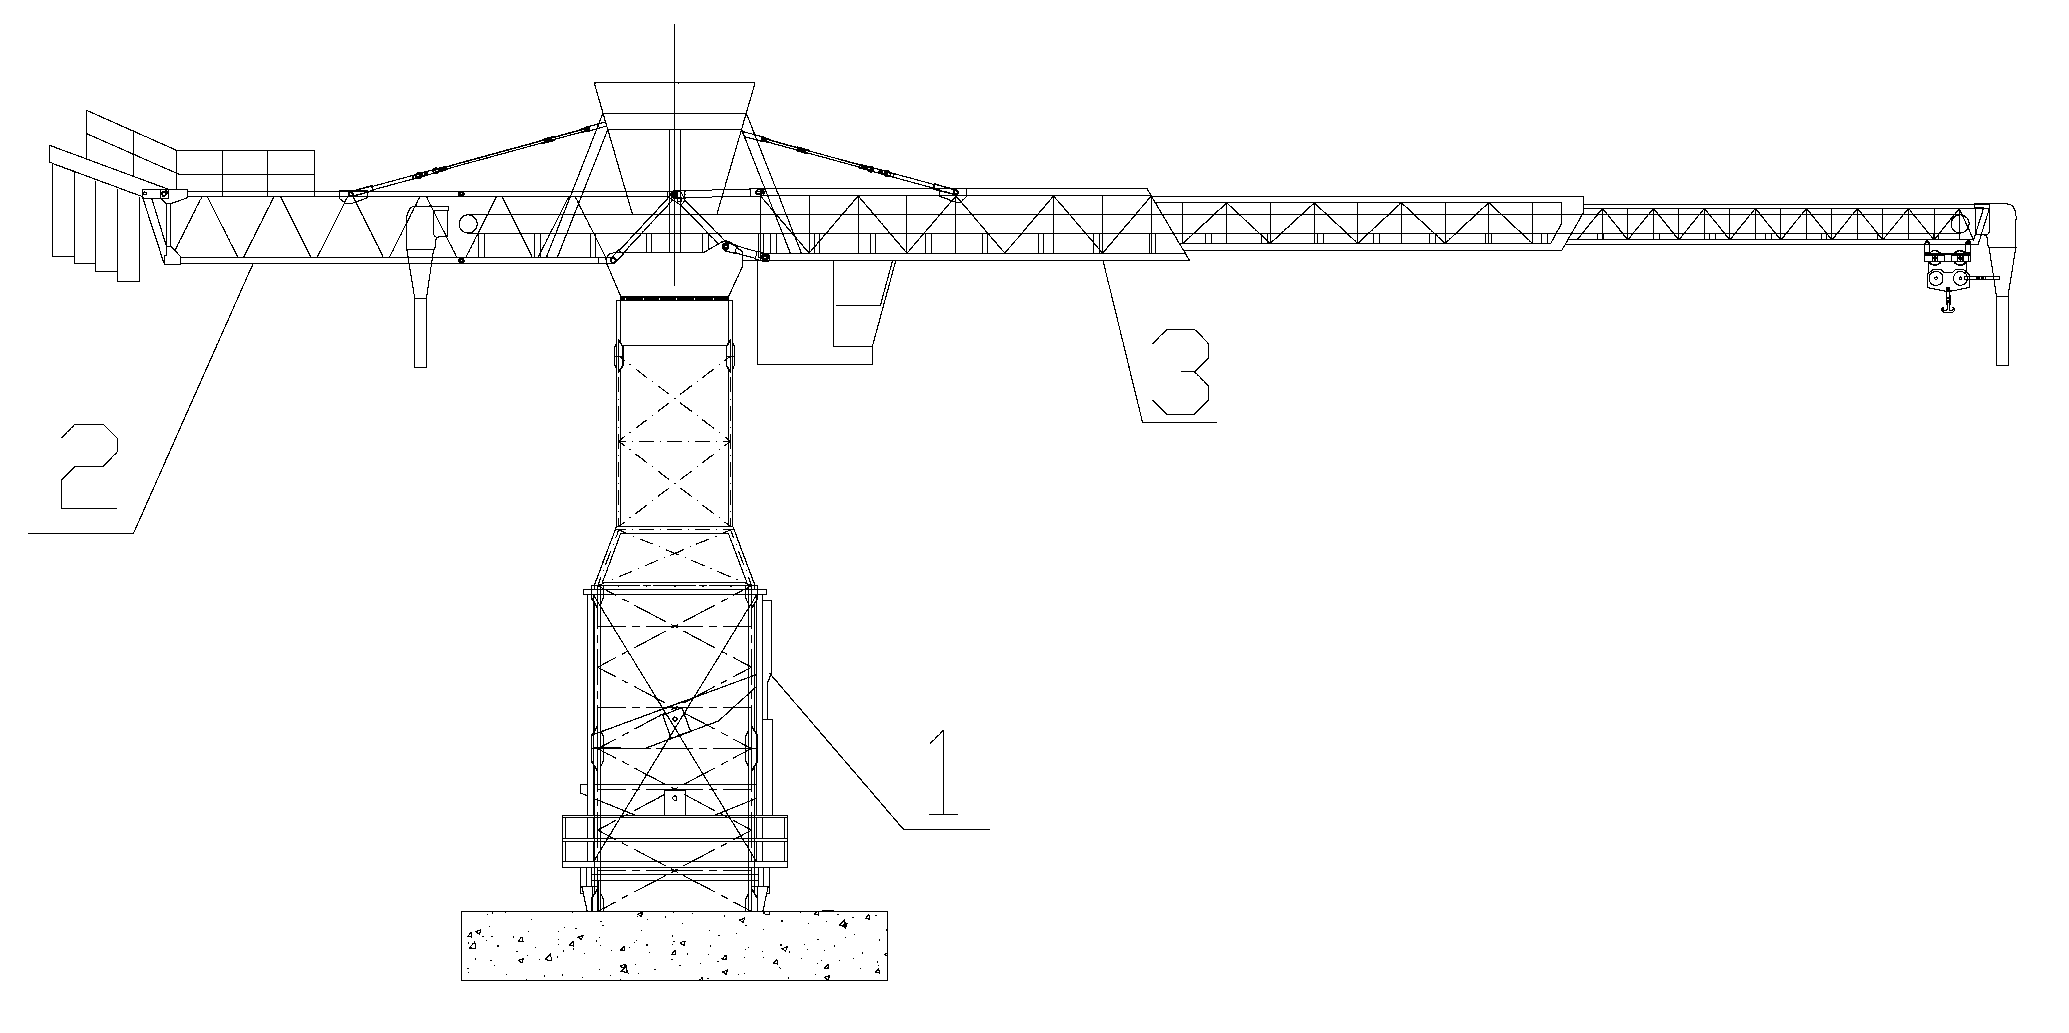 Multi-functional material conveying, distributing and hoisting equipment